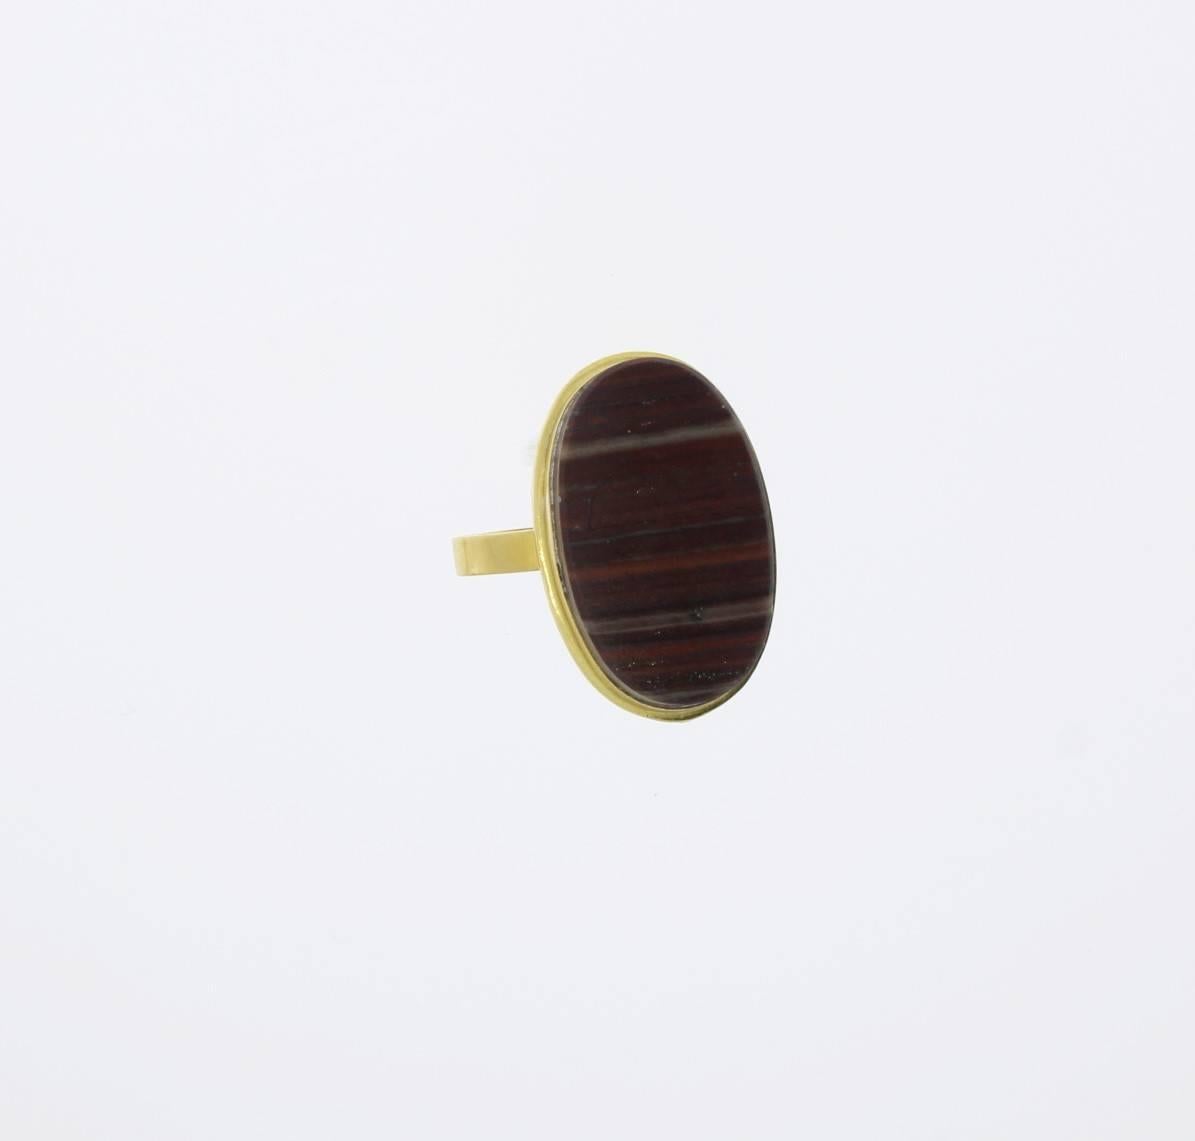 Europe, 1940's- 1950's. Set with striped oval agate. Mounted in 14 carat yellow gold. Total weight: 8,91 g.
Dimensions: 1.06 x 0.71 in ( 2,7 x 1,8 cm ), Height: 0.28 in ( 0,7 cm ). Ring size: 54 ( US 6 3/4 ). Resizable.